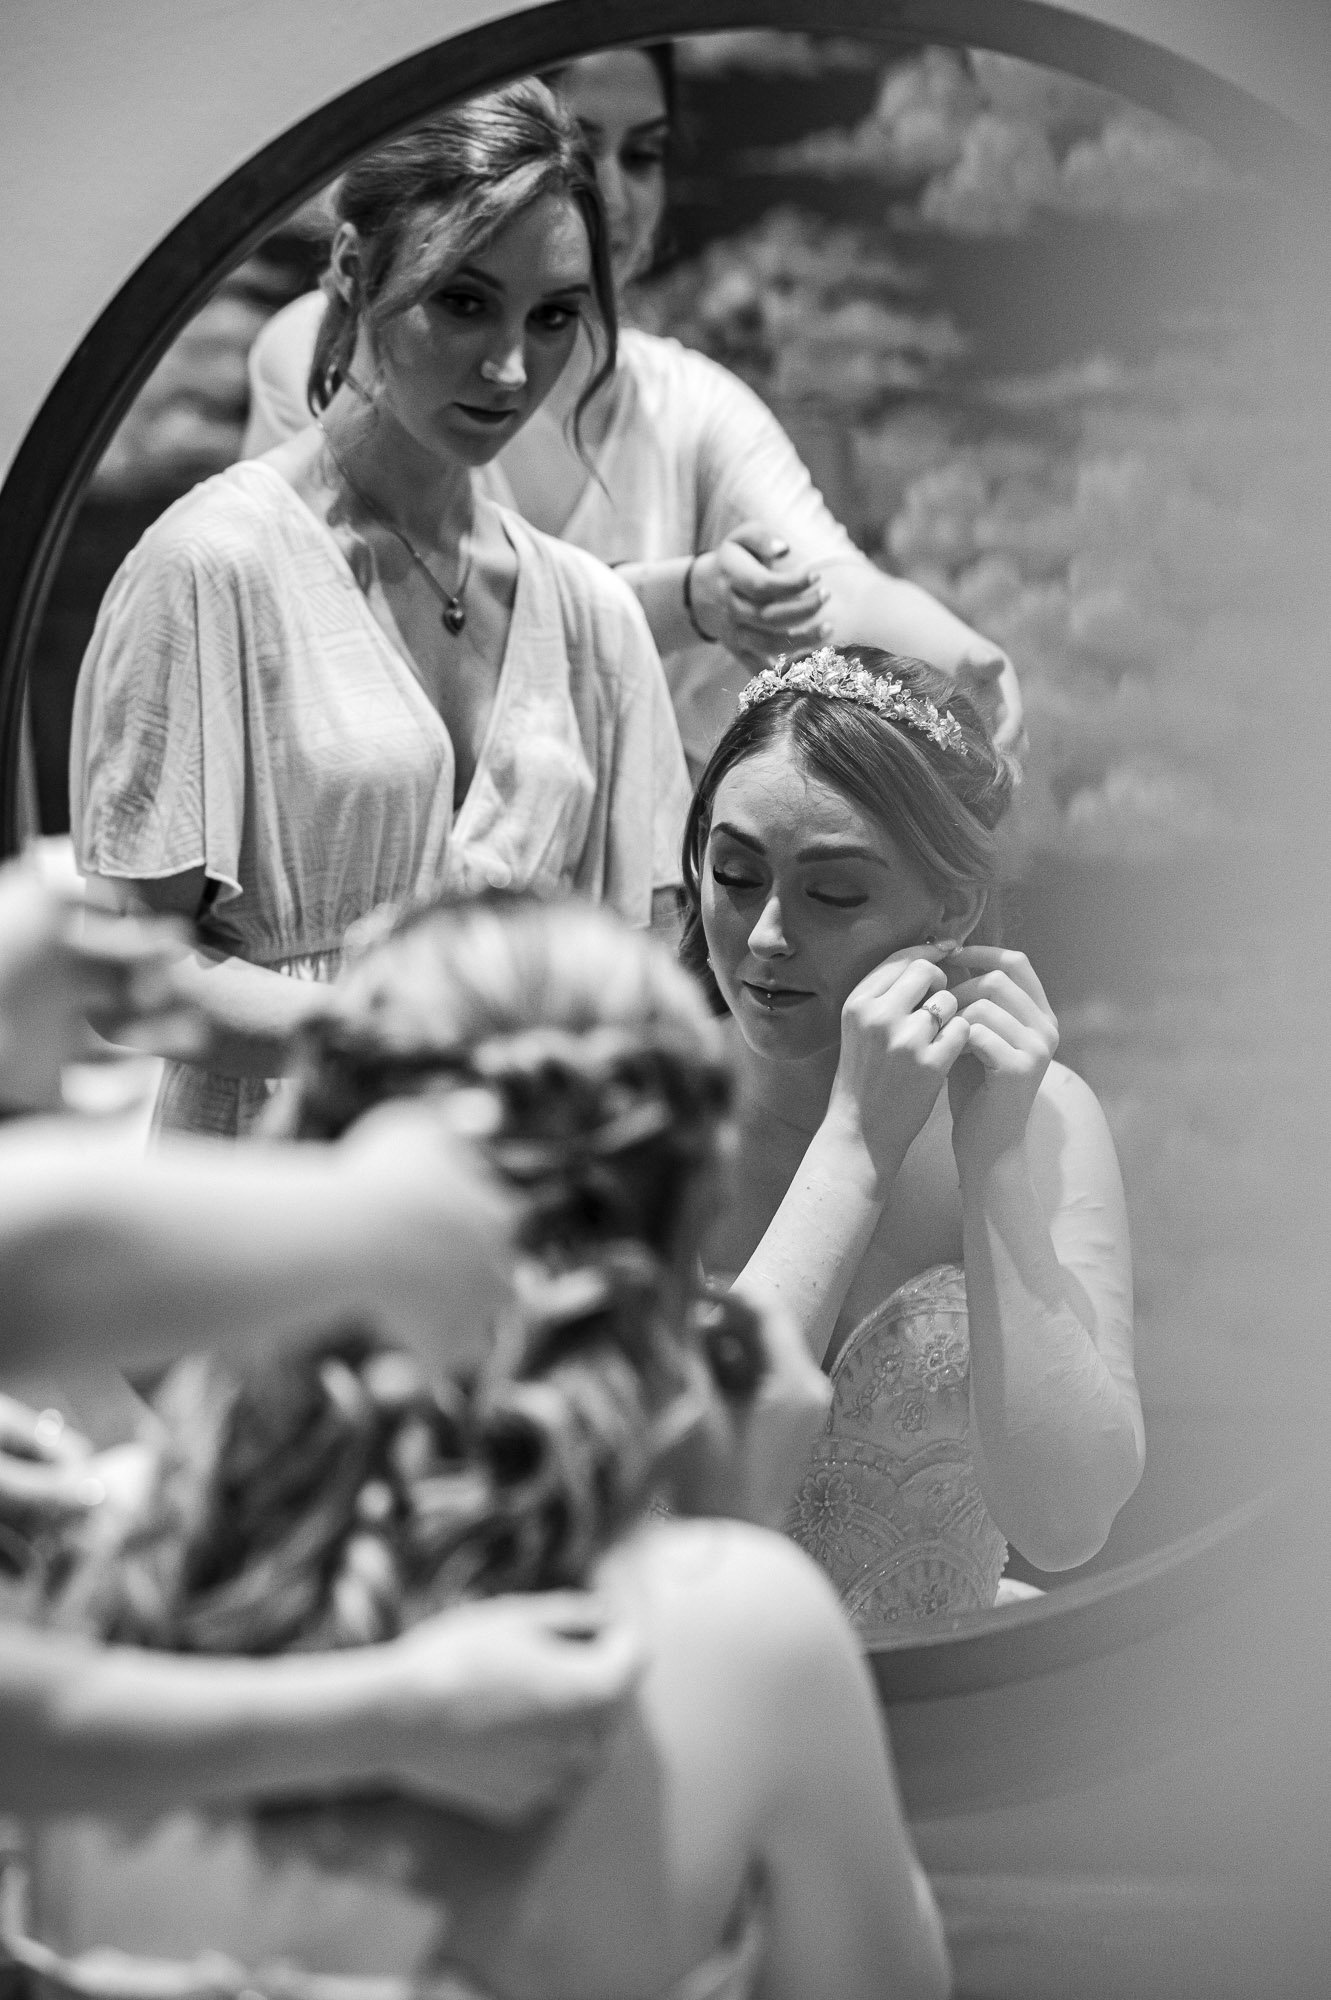 Finishing touches for the bride